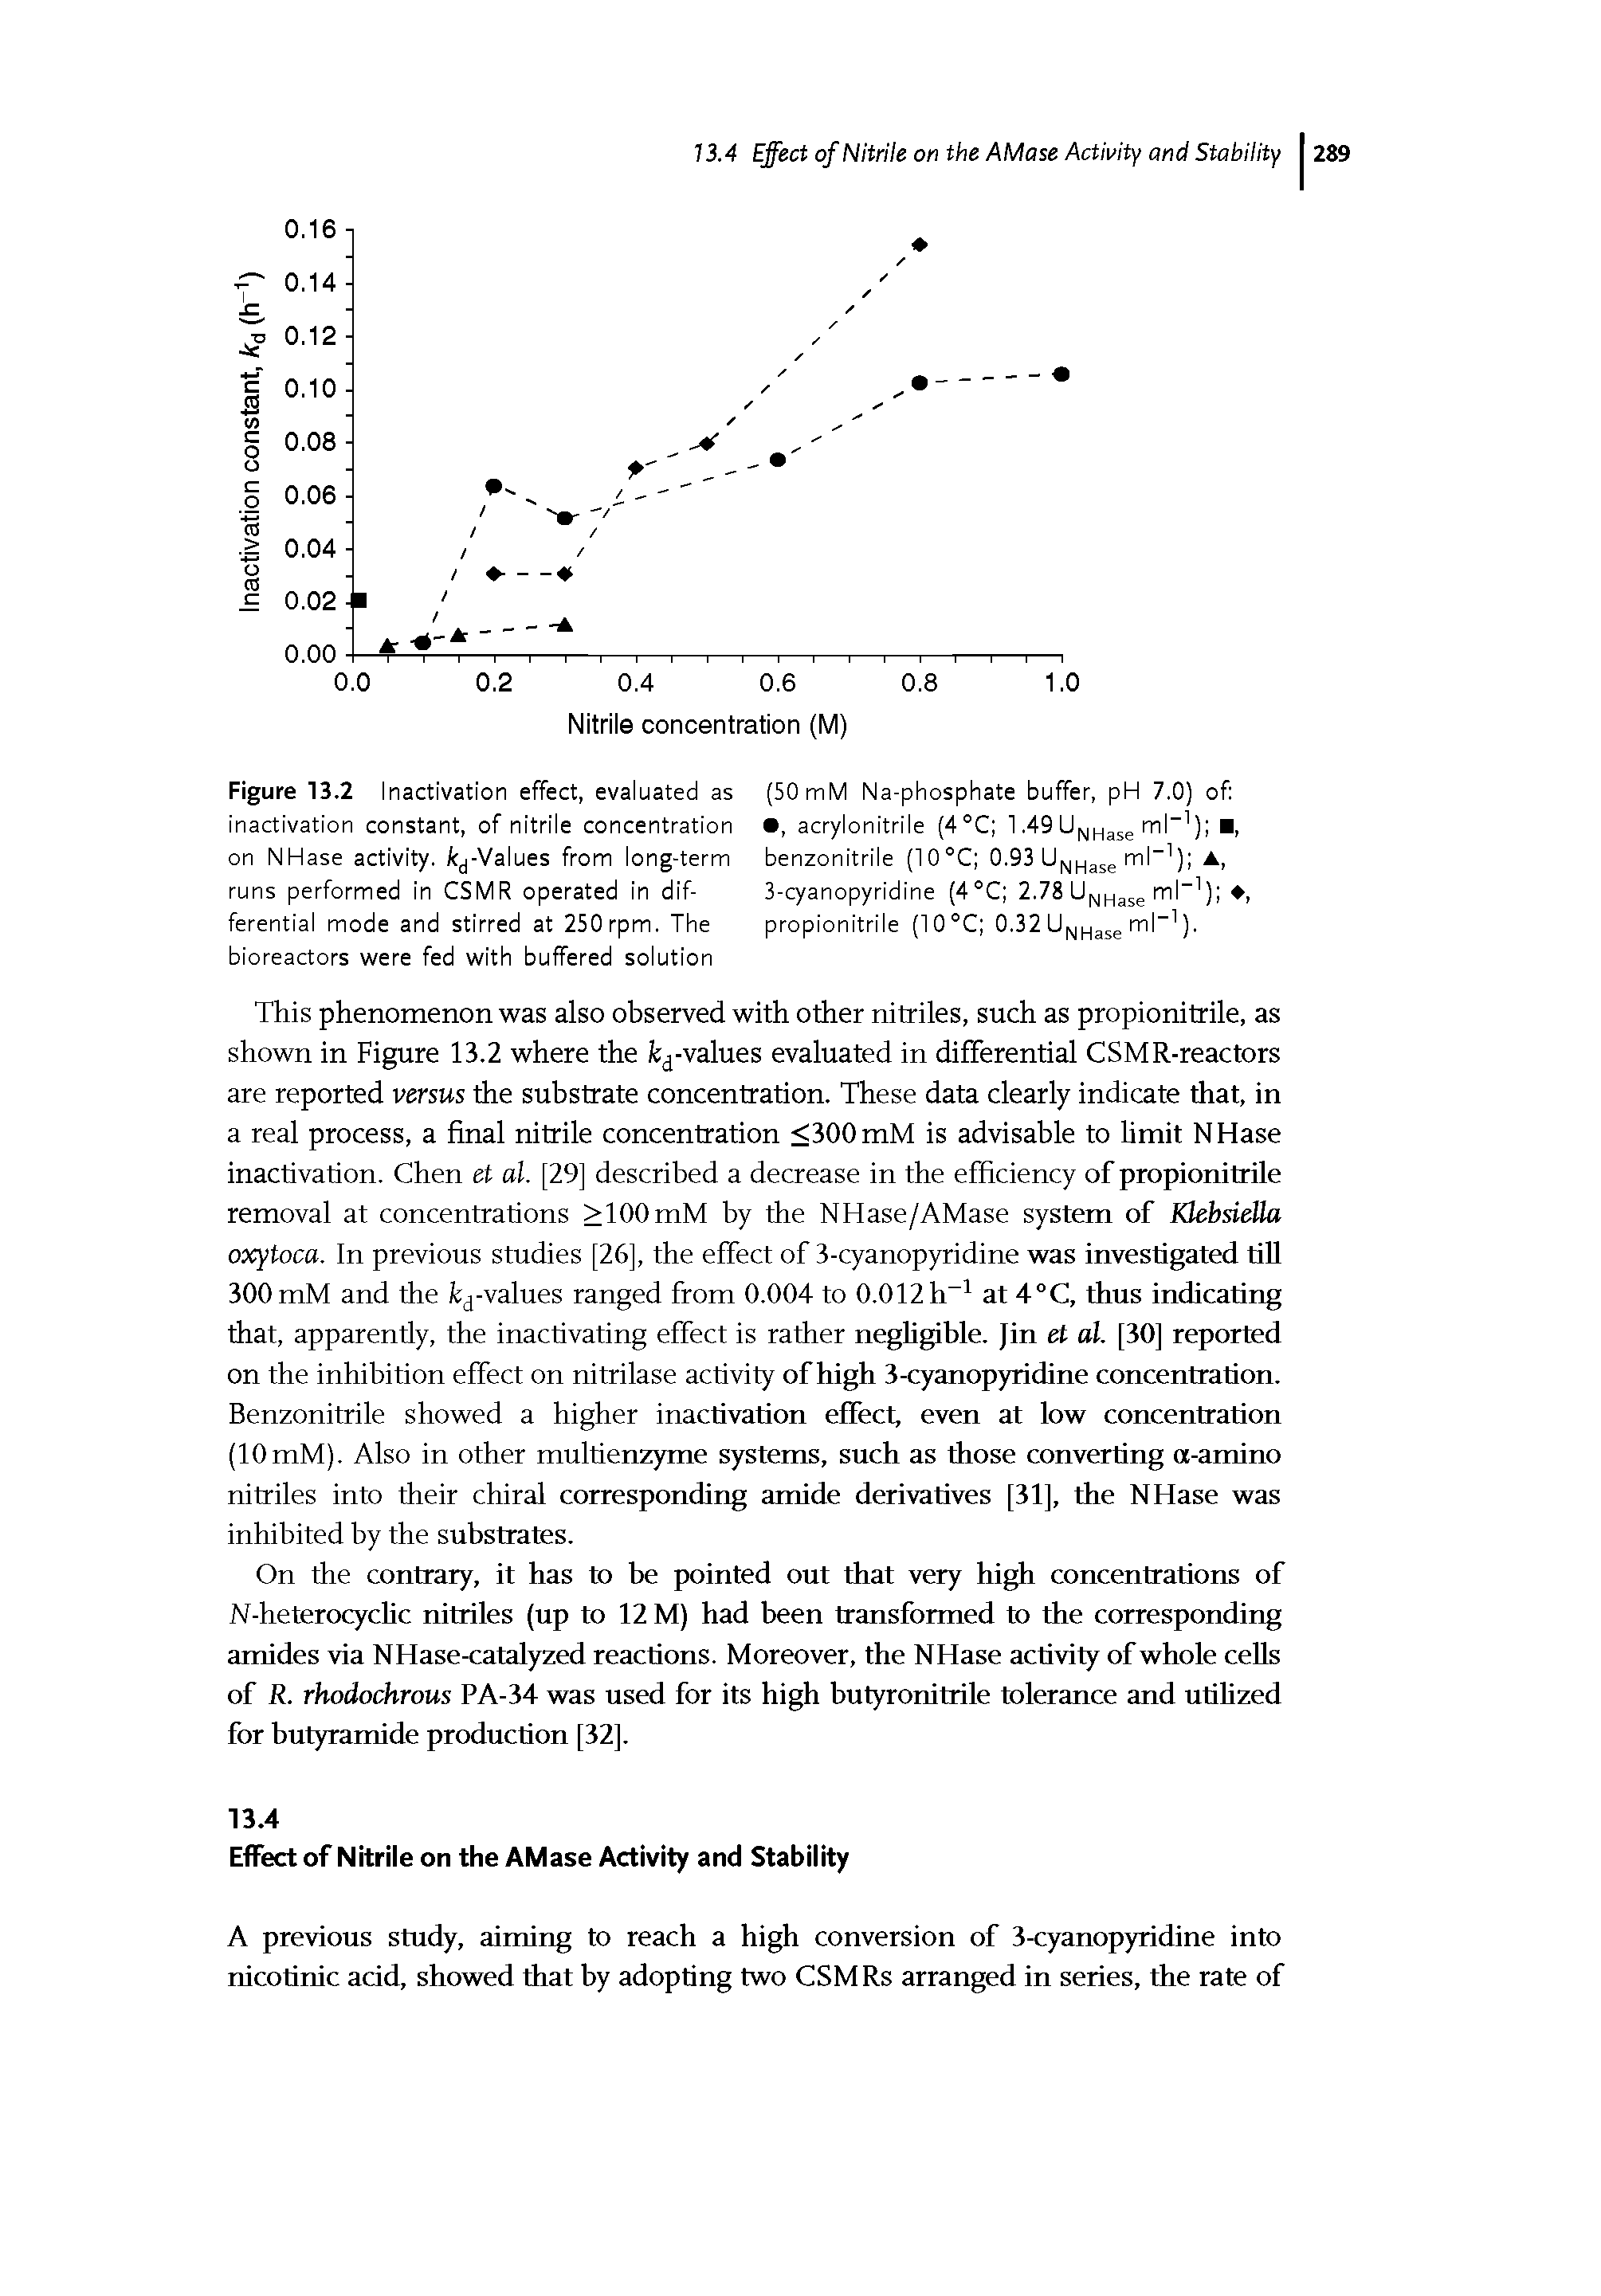 Figure 13.2 Inactivation effect, evaluated as inactivation constant, of nitrile concentration on NHase activity. /tj-Values from long-term runs performed in CSMR operated in differential mode and stirred at 250 rpm. The bioreactors were fed with buffered solution...